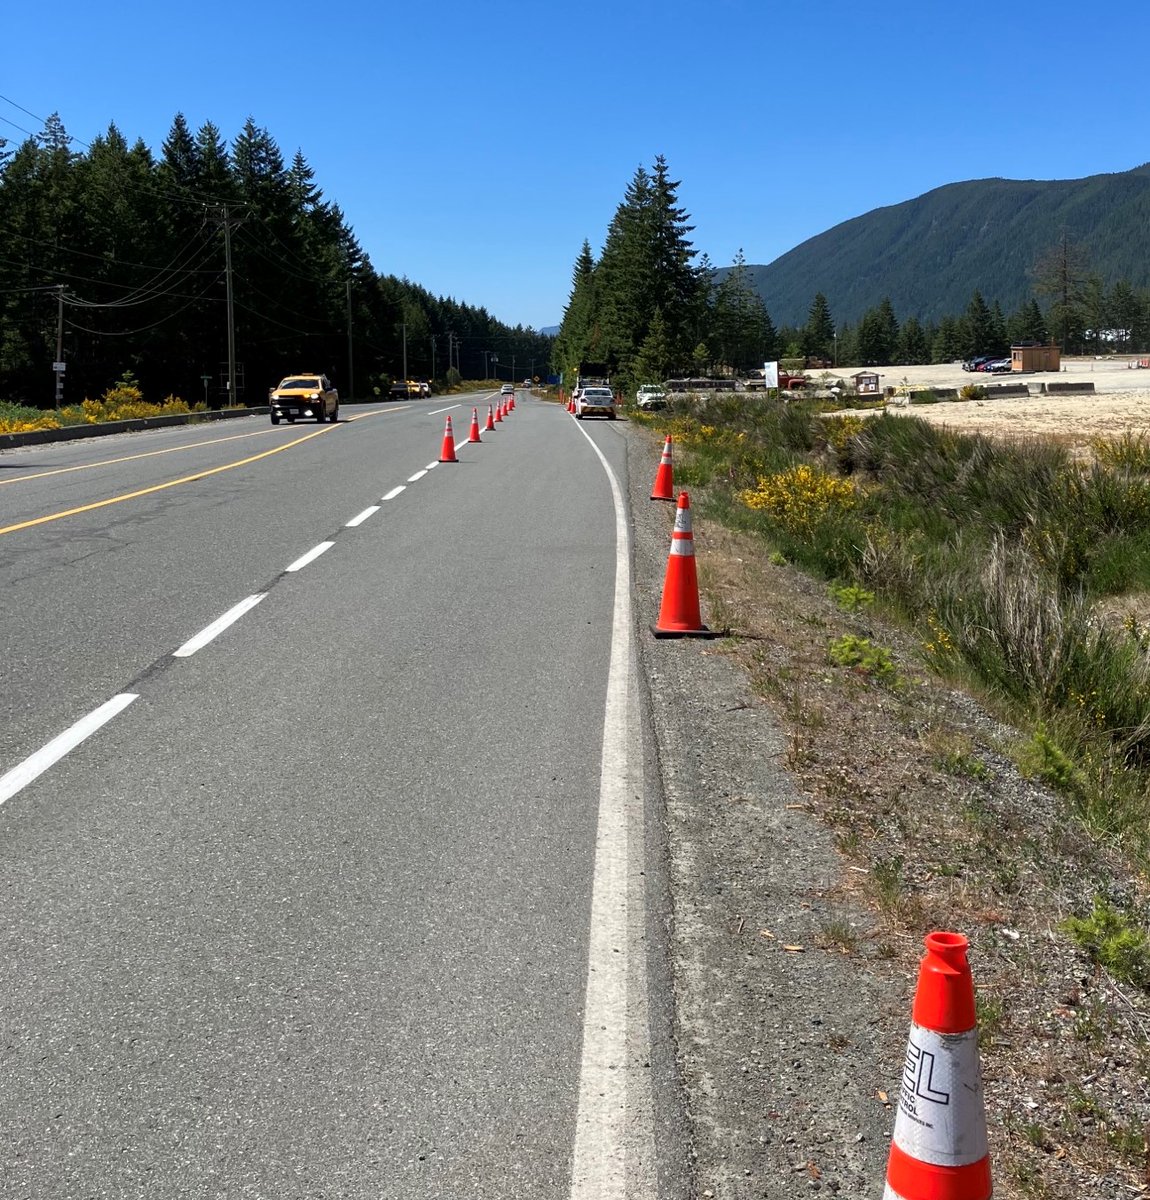 Info checkpoints for people travelling the #BCHwy4 detour are set up at Youbou Rd near #LakeCowichan (seen here) and at Aspeden Rd near #PortAlberni.

For those who must travel: be prepared, be patient. Fuel up, bring extra supplies, food/water, and travel during daylight hours.